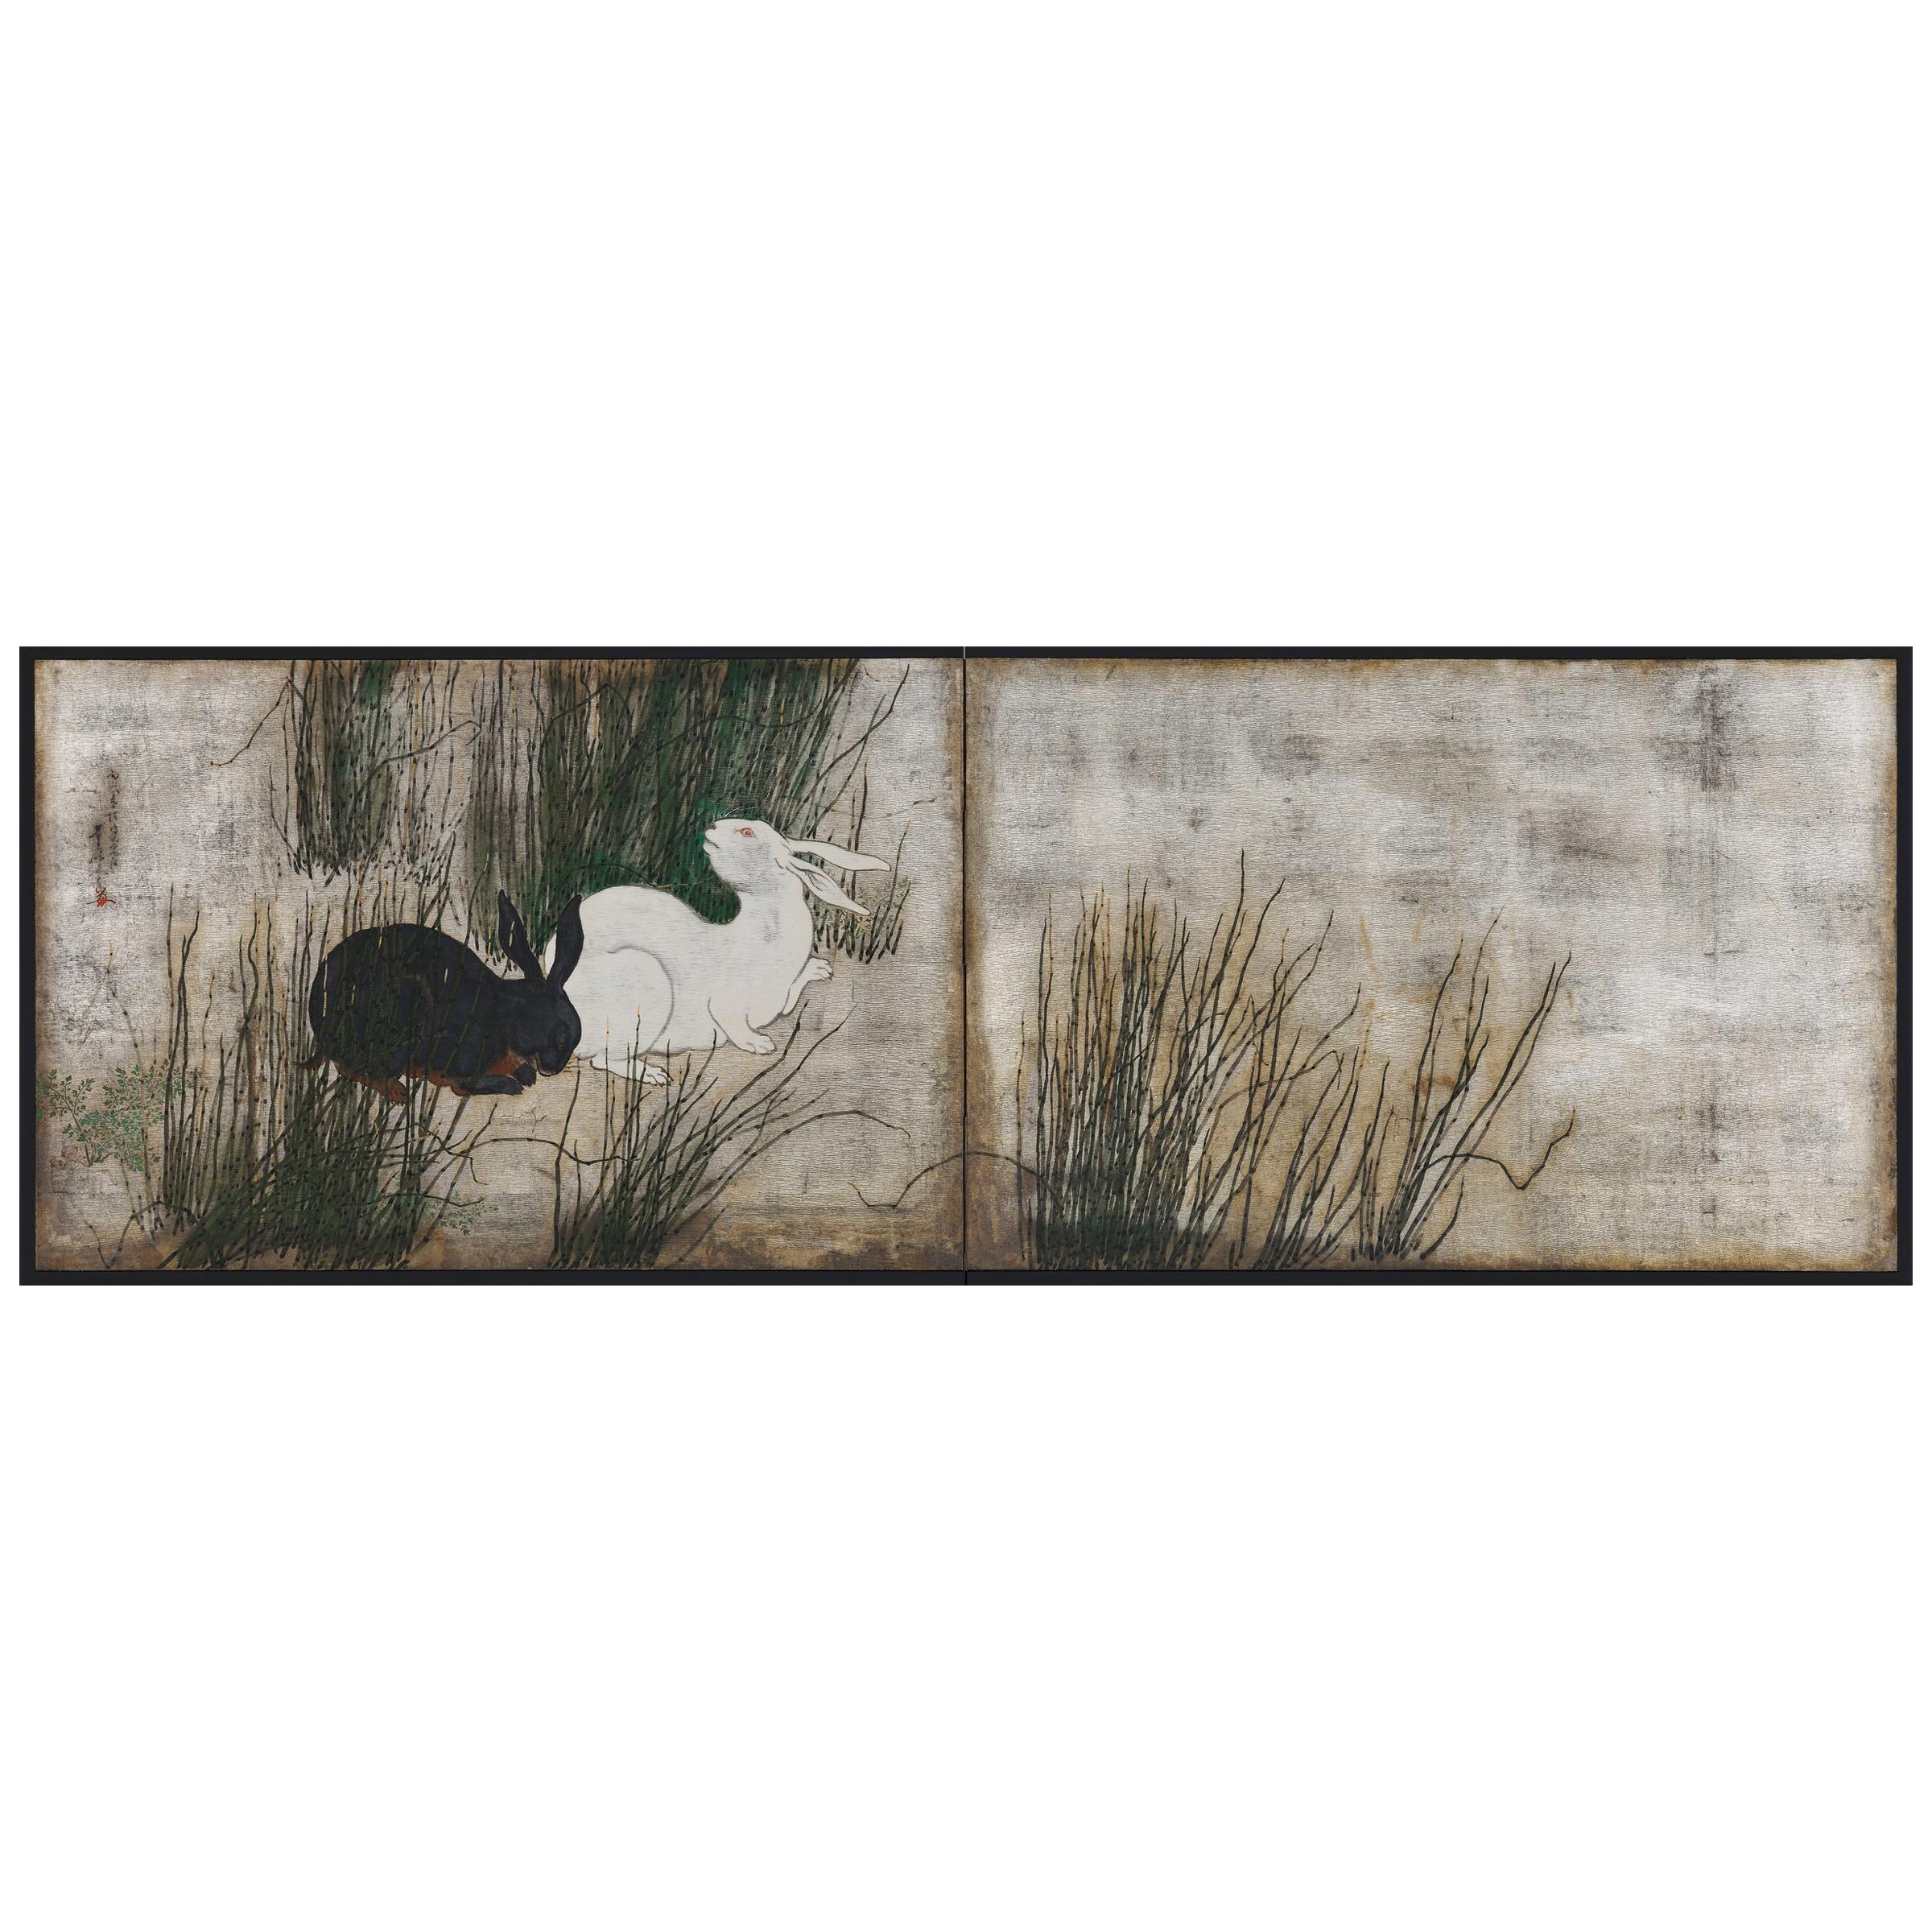 Japanese Screen, 19th Century, Rabbits and Horsetail Reeds on Silver Leaf